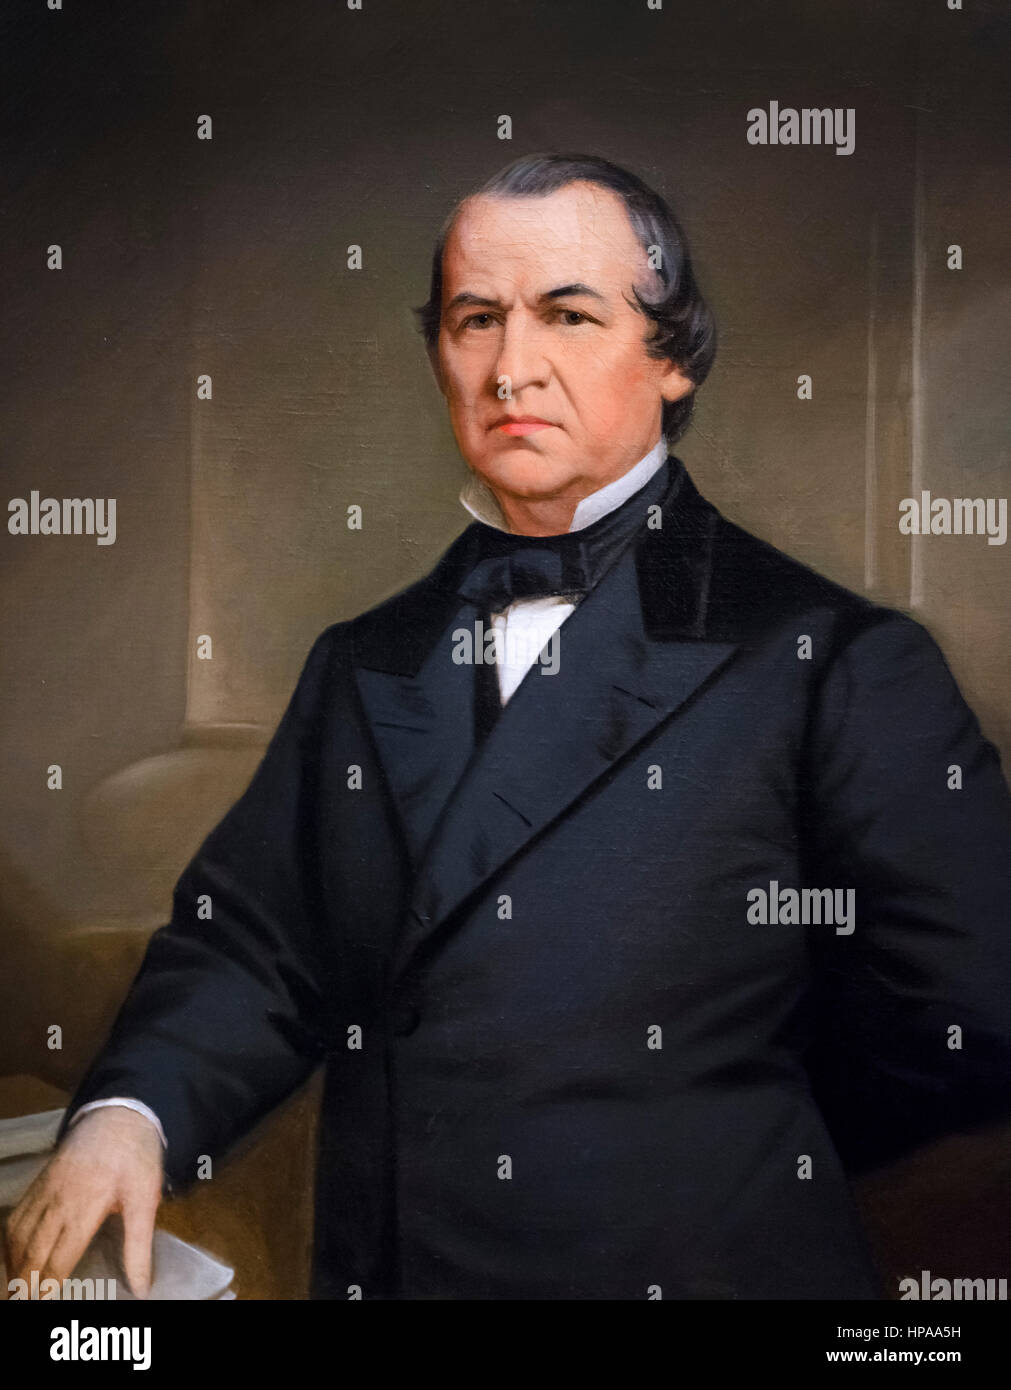 Andrew Johnson. Portrait of the 17th US President, Andrew Johnson (1808-1875) by Washington Bogart Cooper, oil on canvas, after 1866. Stock Photo